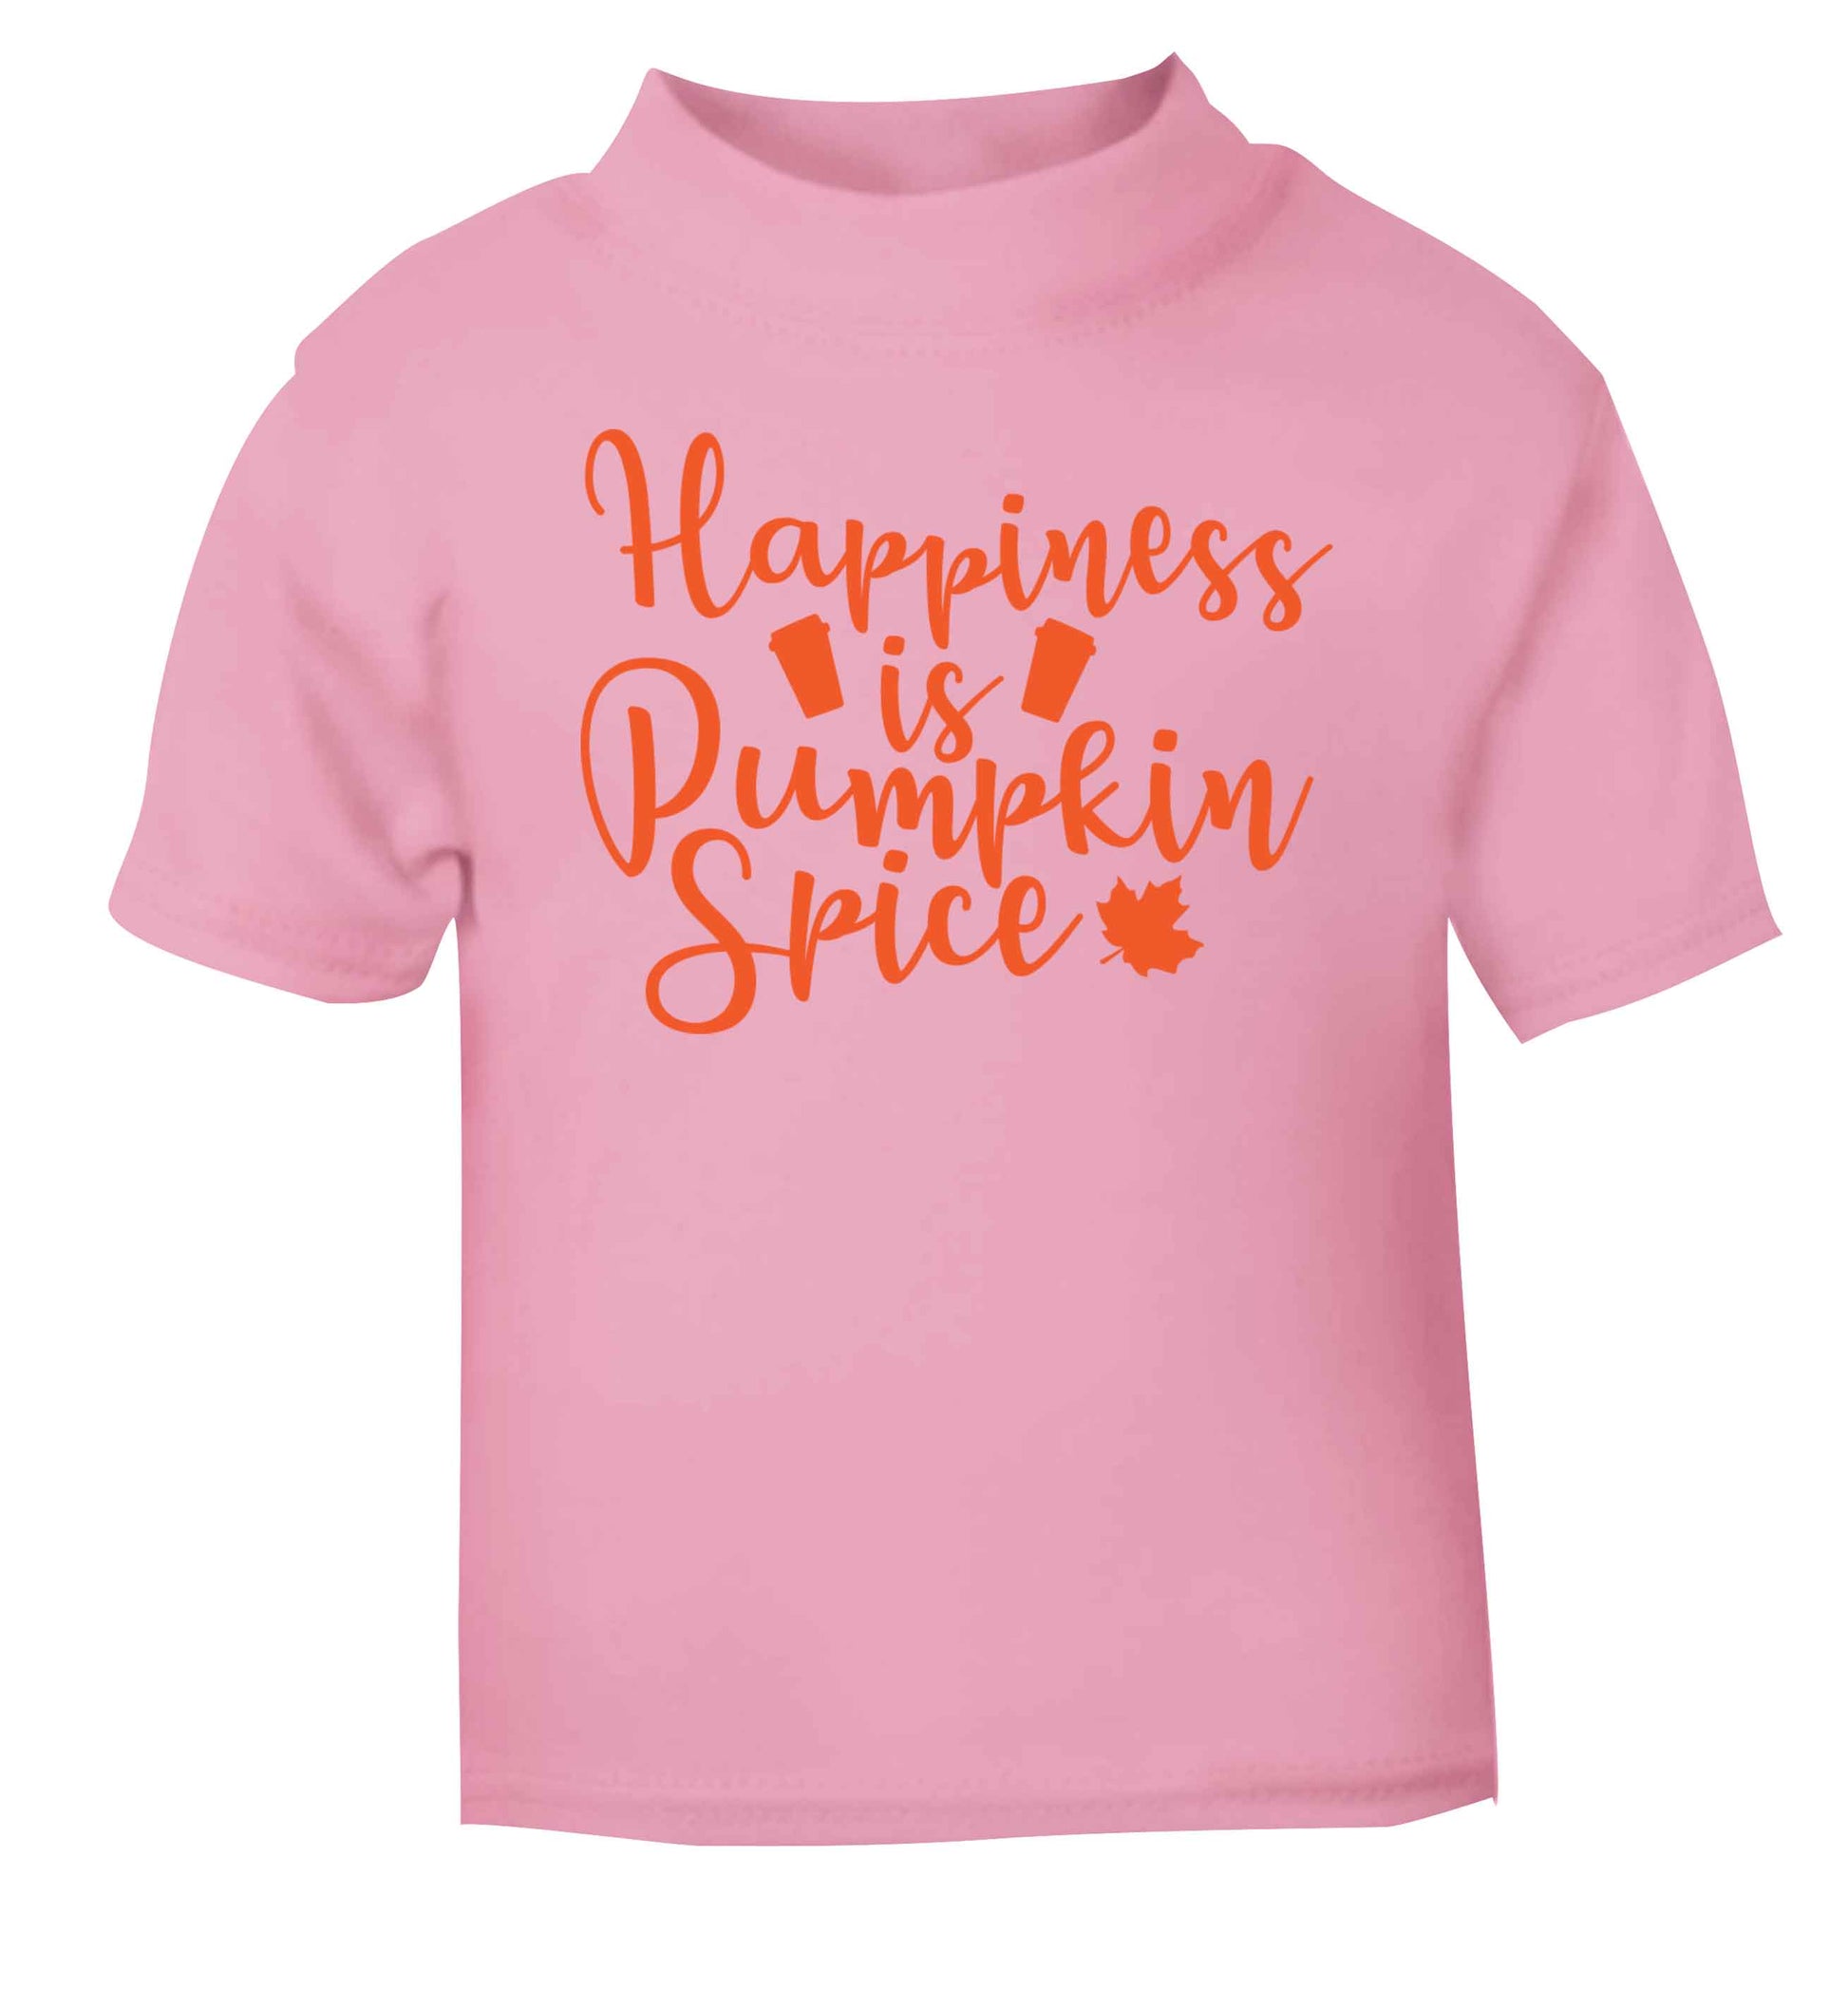 Happiness Pumpkin Spice light pink baby toddler Tshirt 2 Years